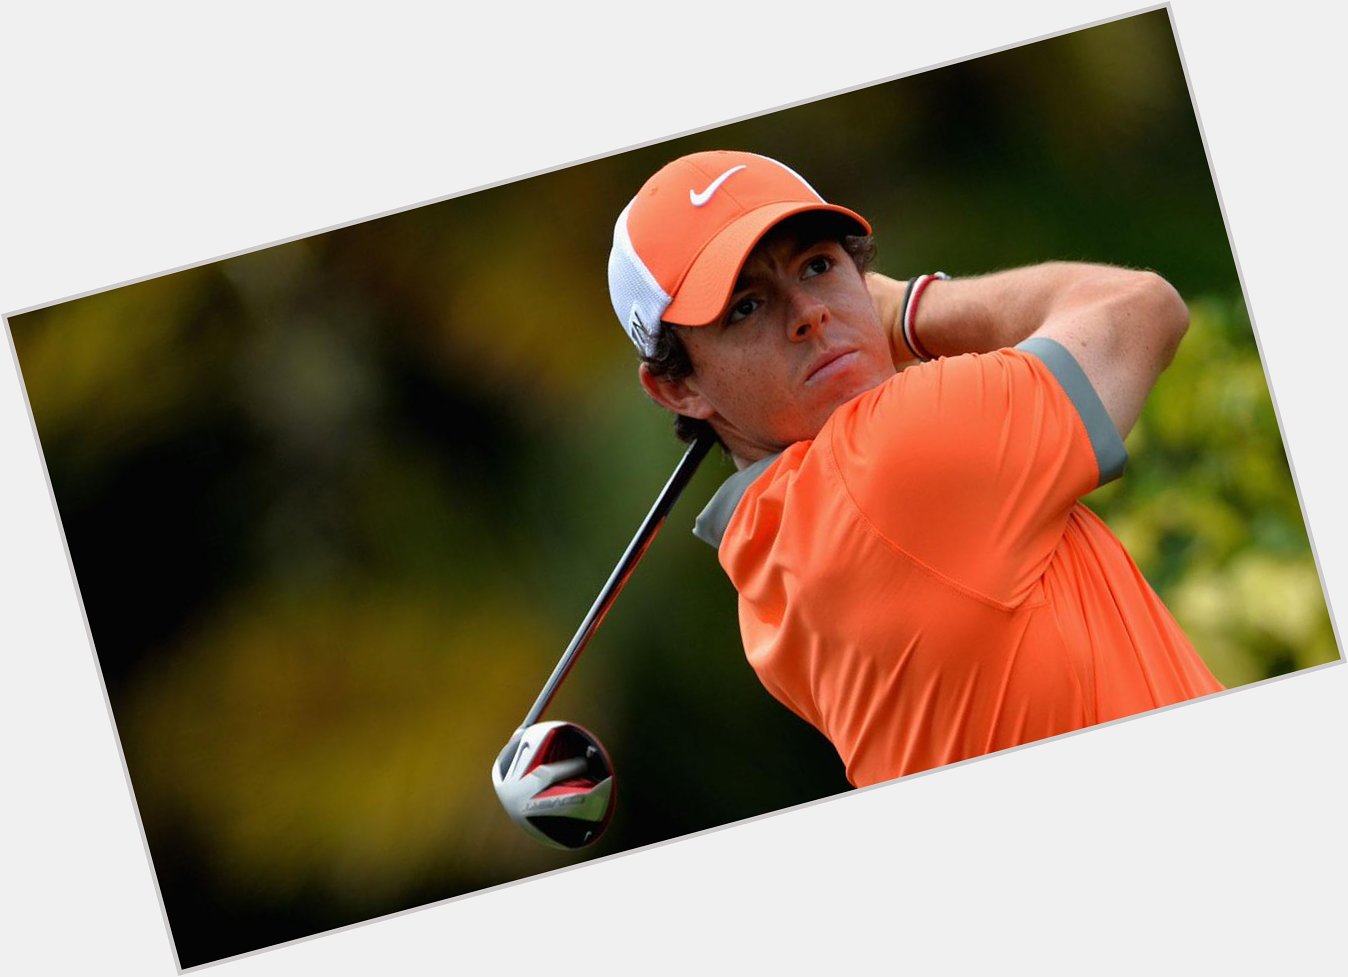 Happy Birthday to Rory McIlroy, who turns 26 today! 